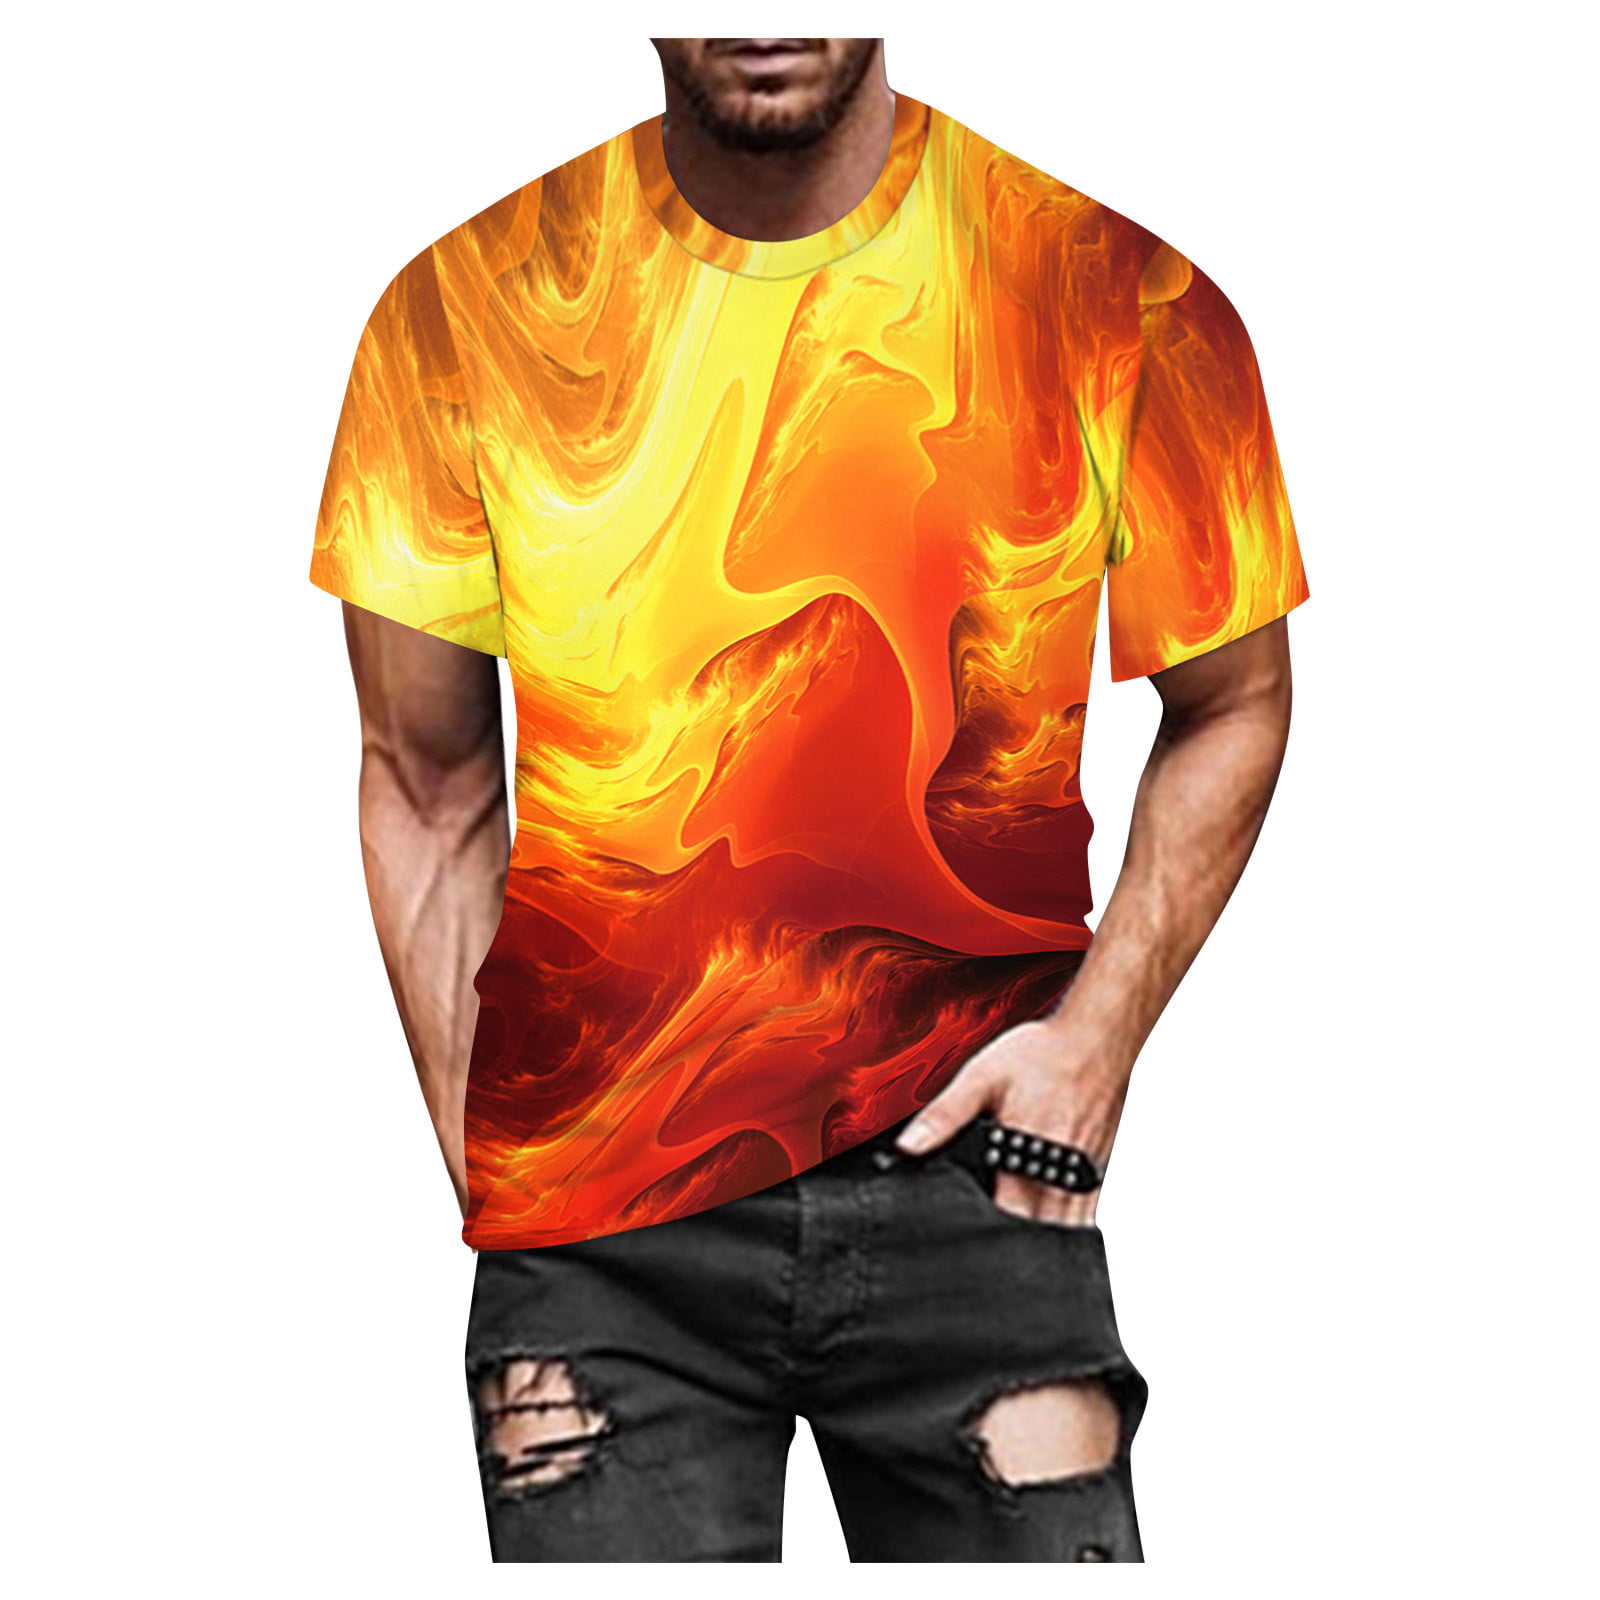 Mens Womens Casual 3D Print Graphic T Shirt Short Sleeve Slim Fit Tee Top Blouse 